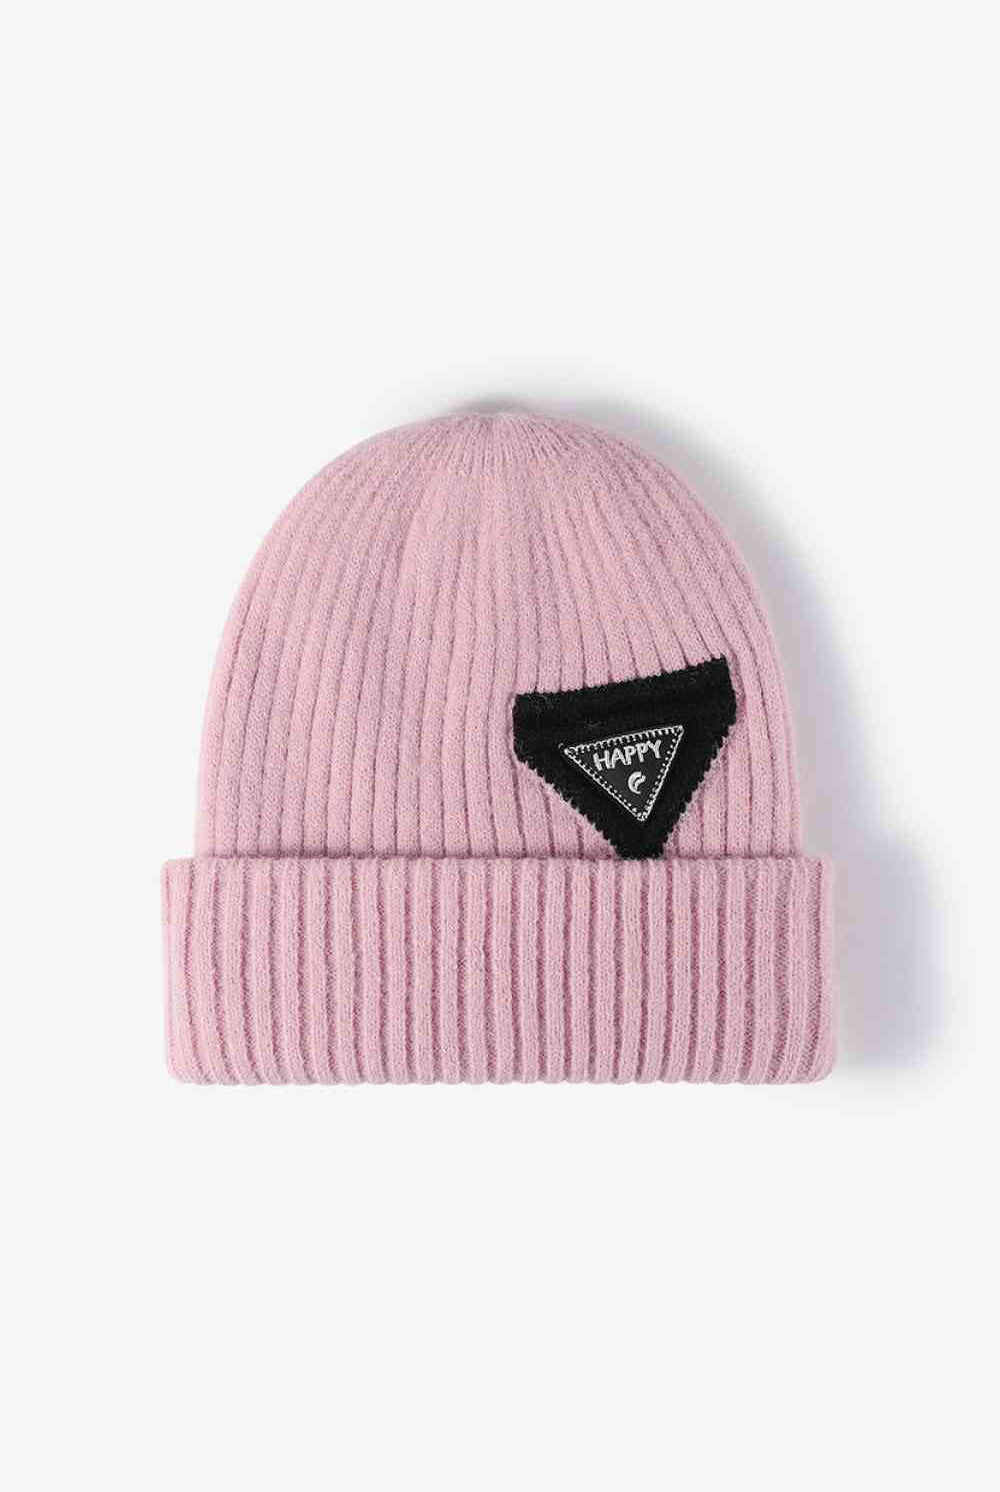 Misty Rose HAPPY Contrast Beanie Winter Accessories